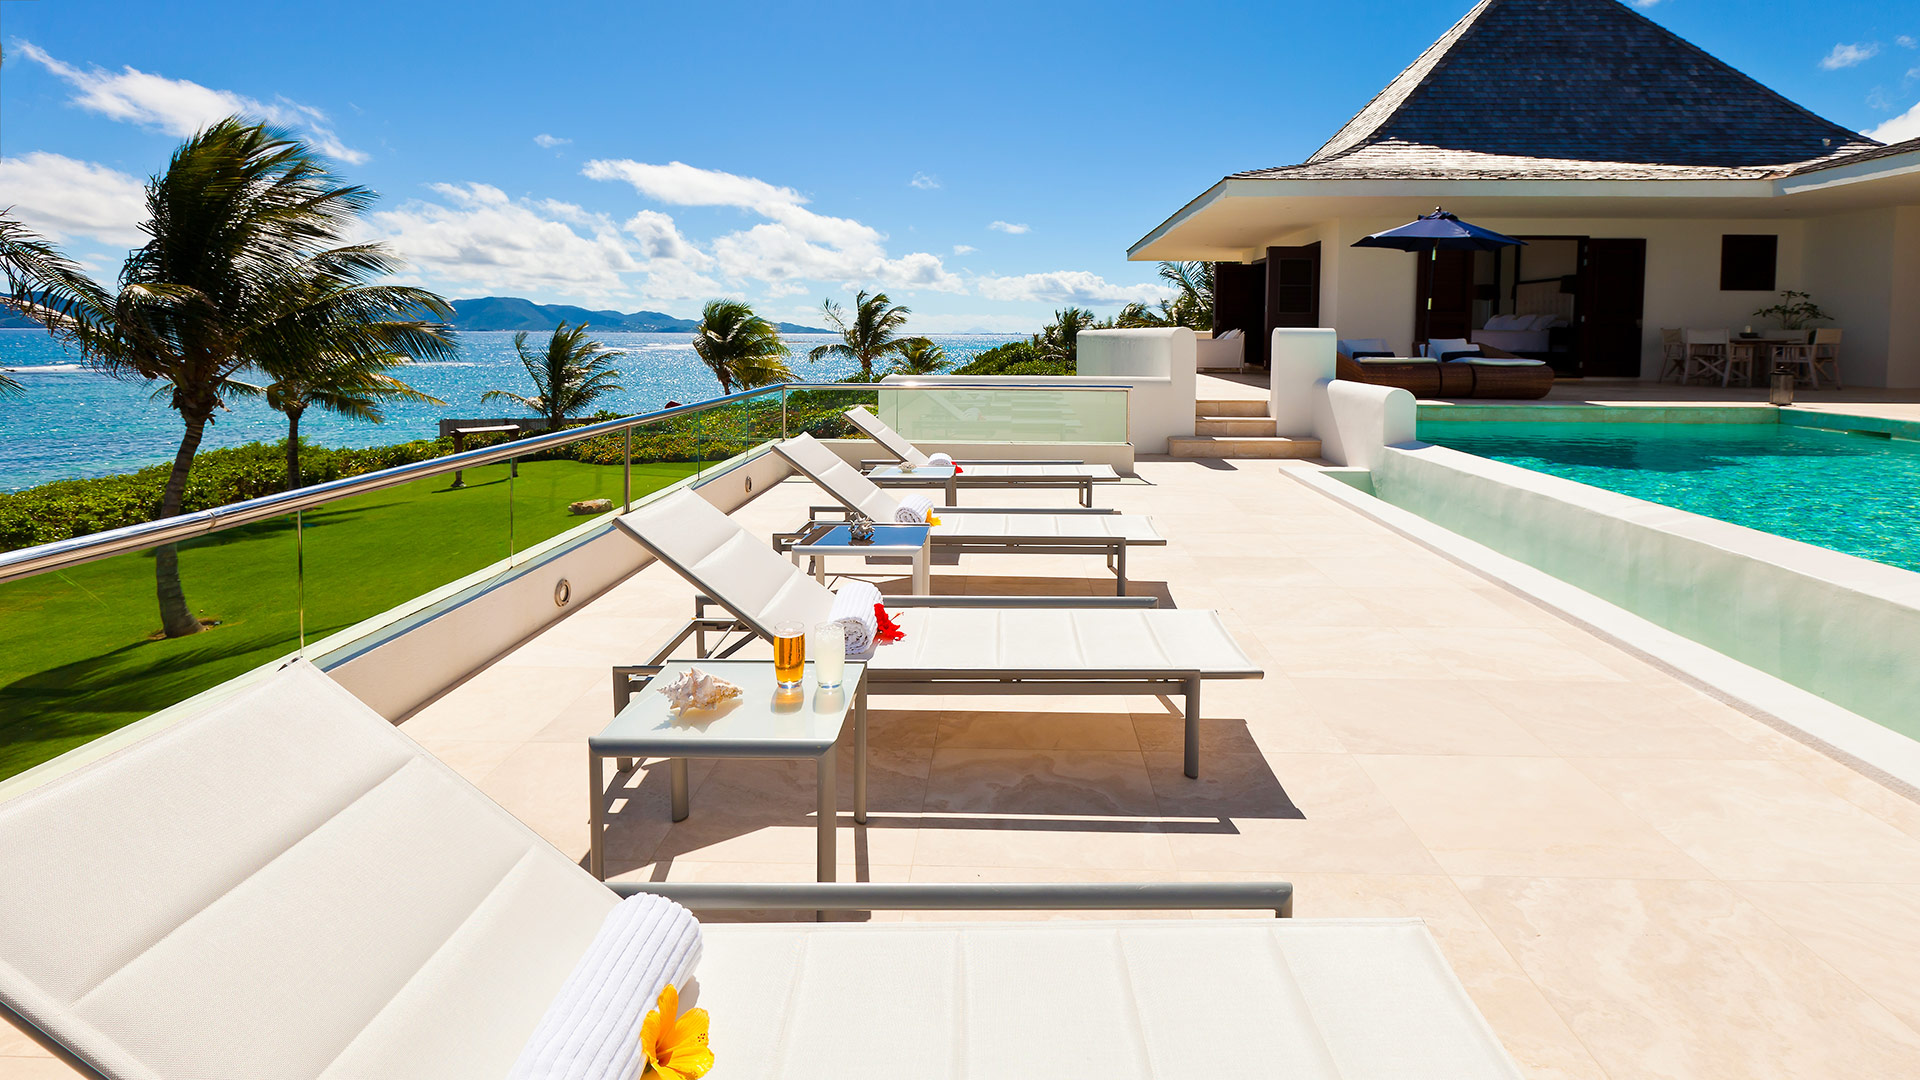 Ample space on the pool decks of two private pools makes Le Bleu Villa a great choice for an extended family or group vacation on Anguilla.
